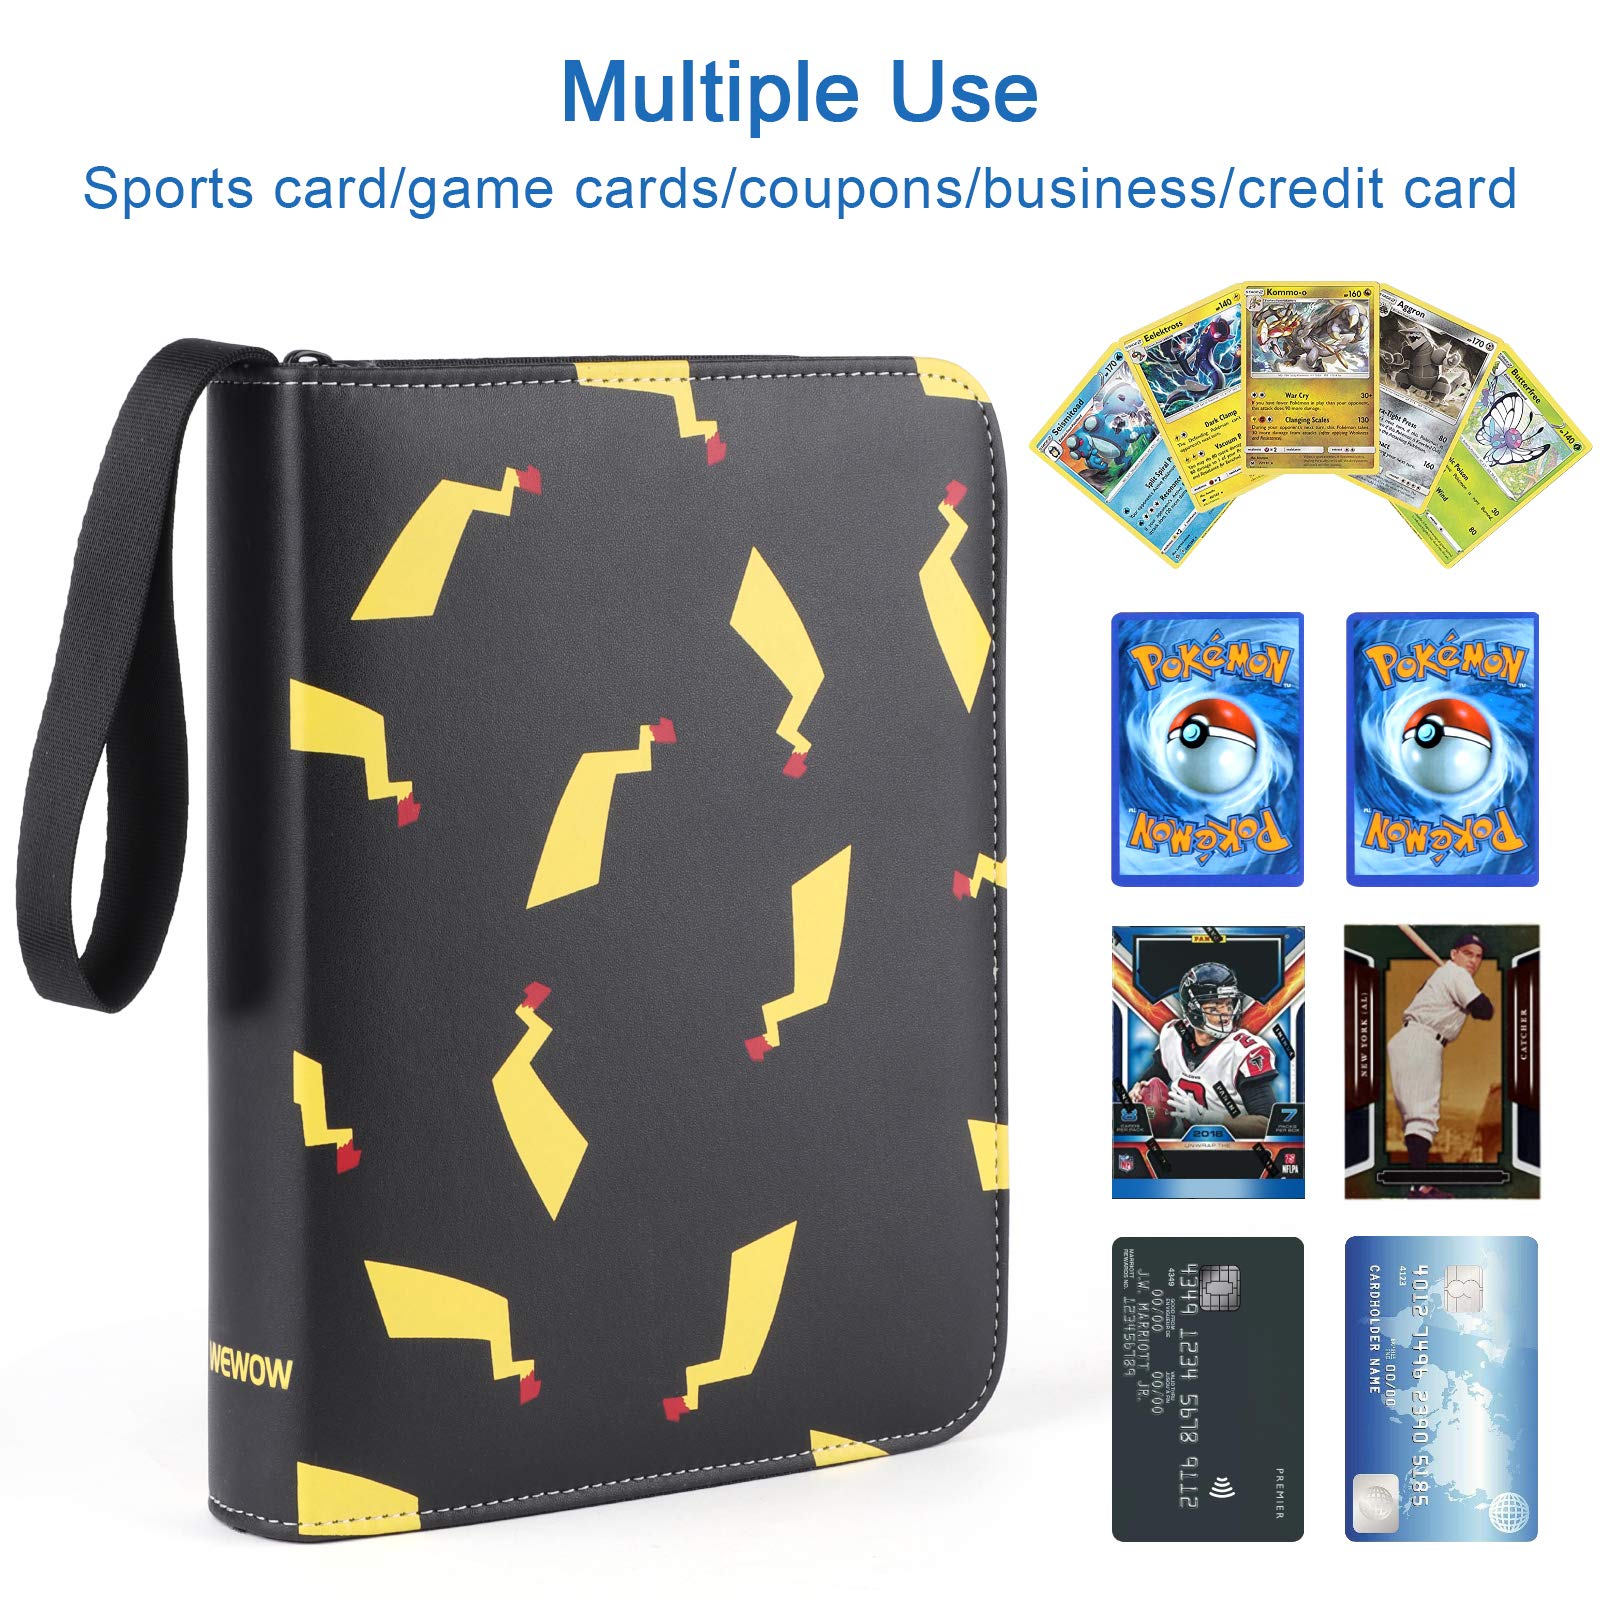 WEWOW Carrying Case Binder for Pokemon Cards, Card Collector Album Holder Fits 400 Cards with 50 Removable Sheets, 4 Pocket Card Binder Book Folder Organizer for Trading Cards.